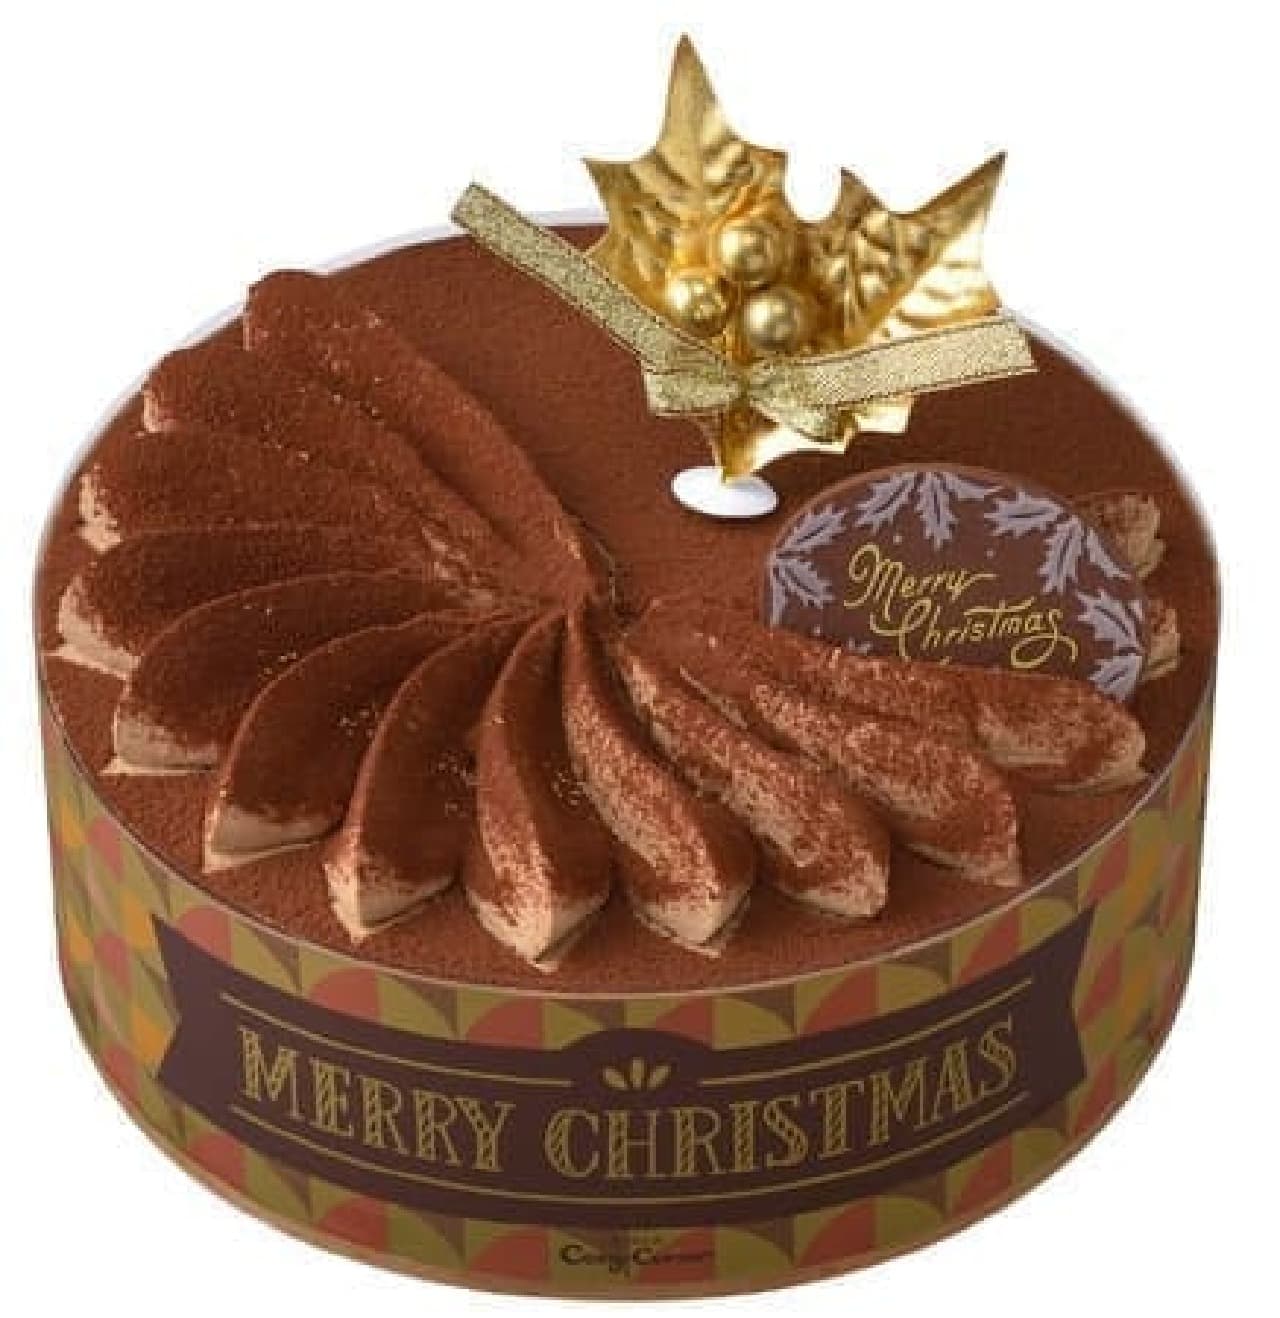 Ginza Cozy Corner mail order limited "Christmas chocolate cake (No. 5)"